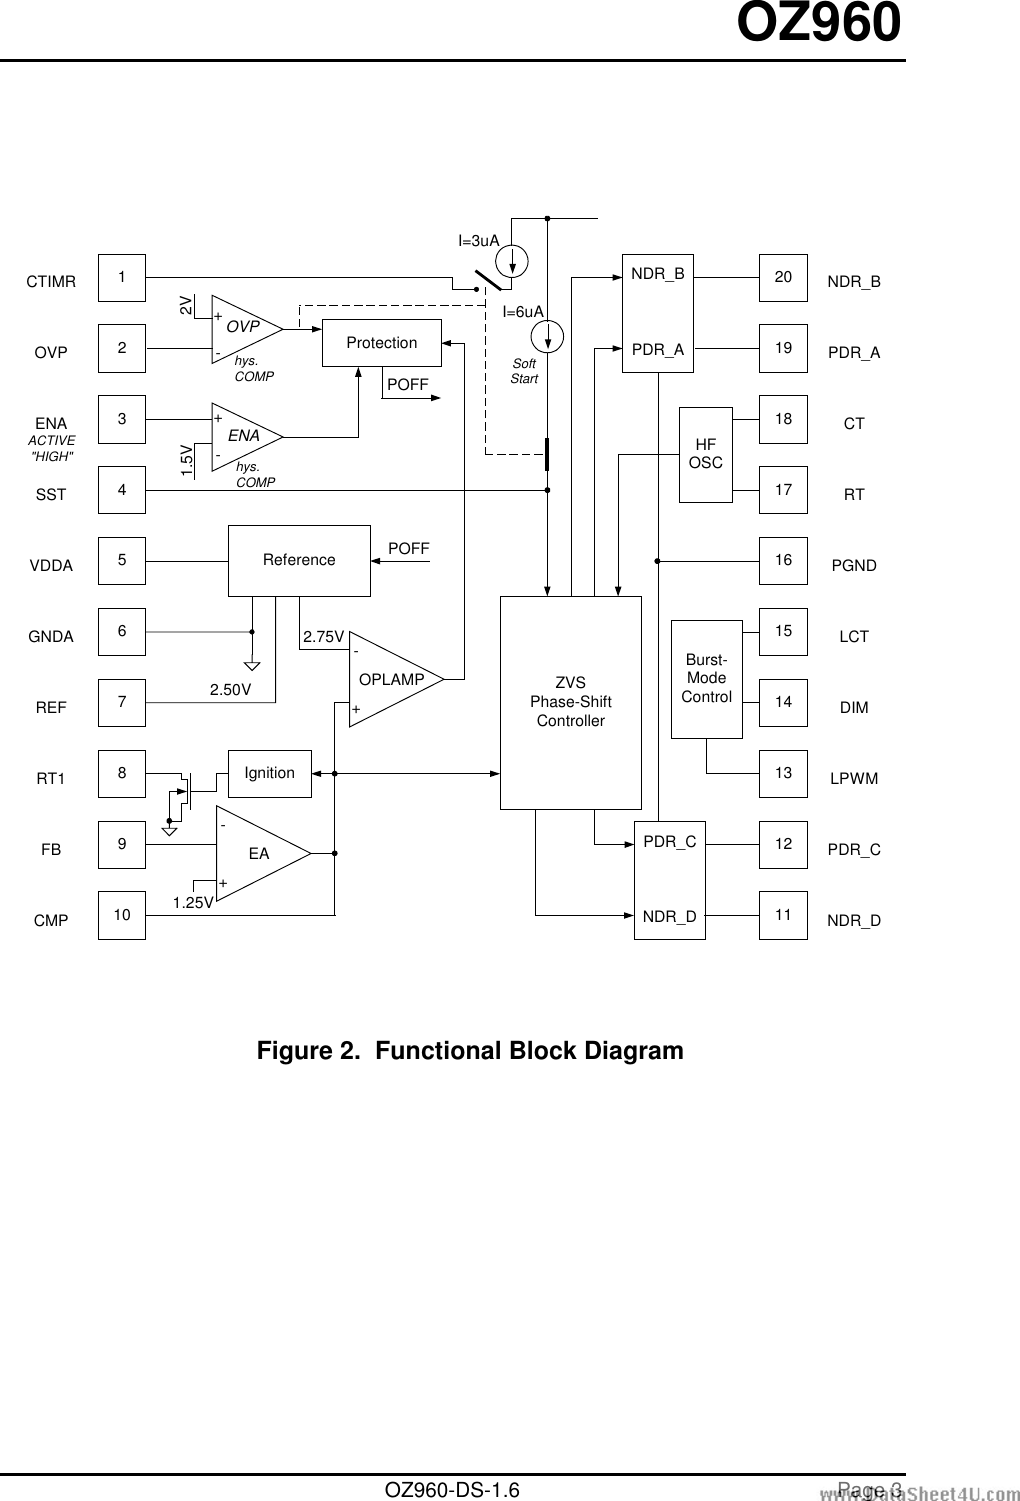 Page 3 of 12 - CCFL Backlight Controller 2008129131956425